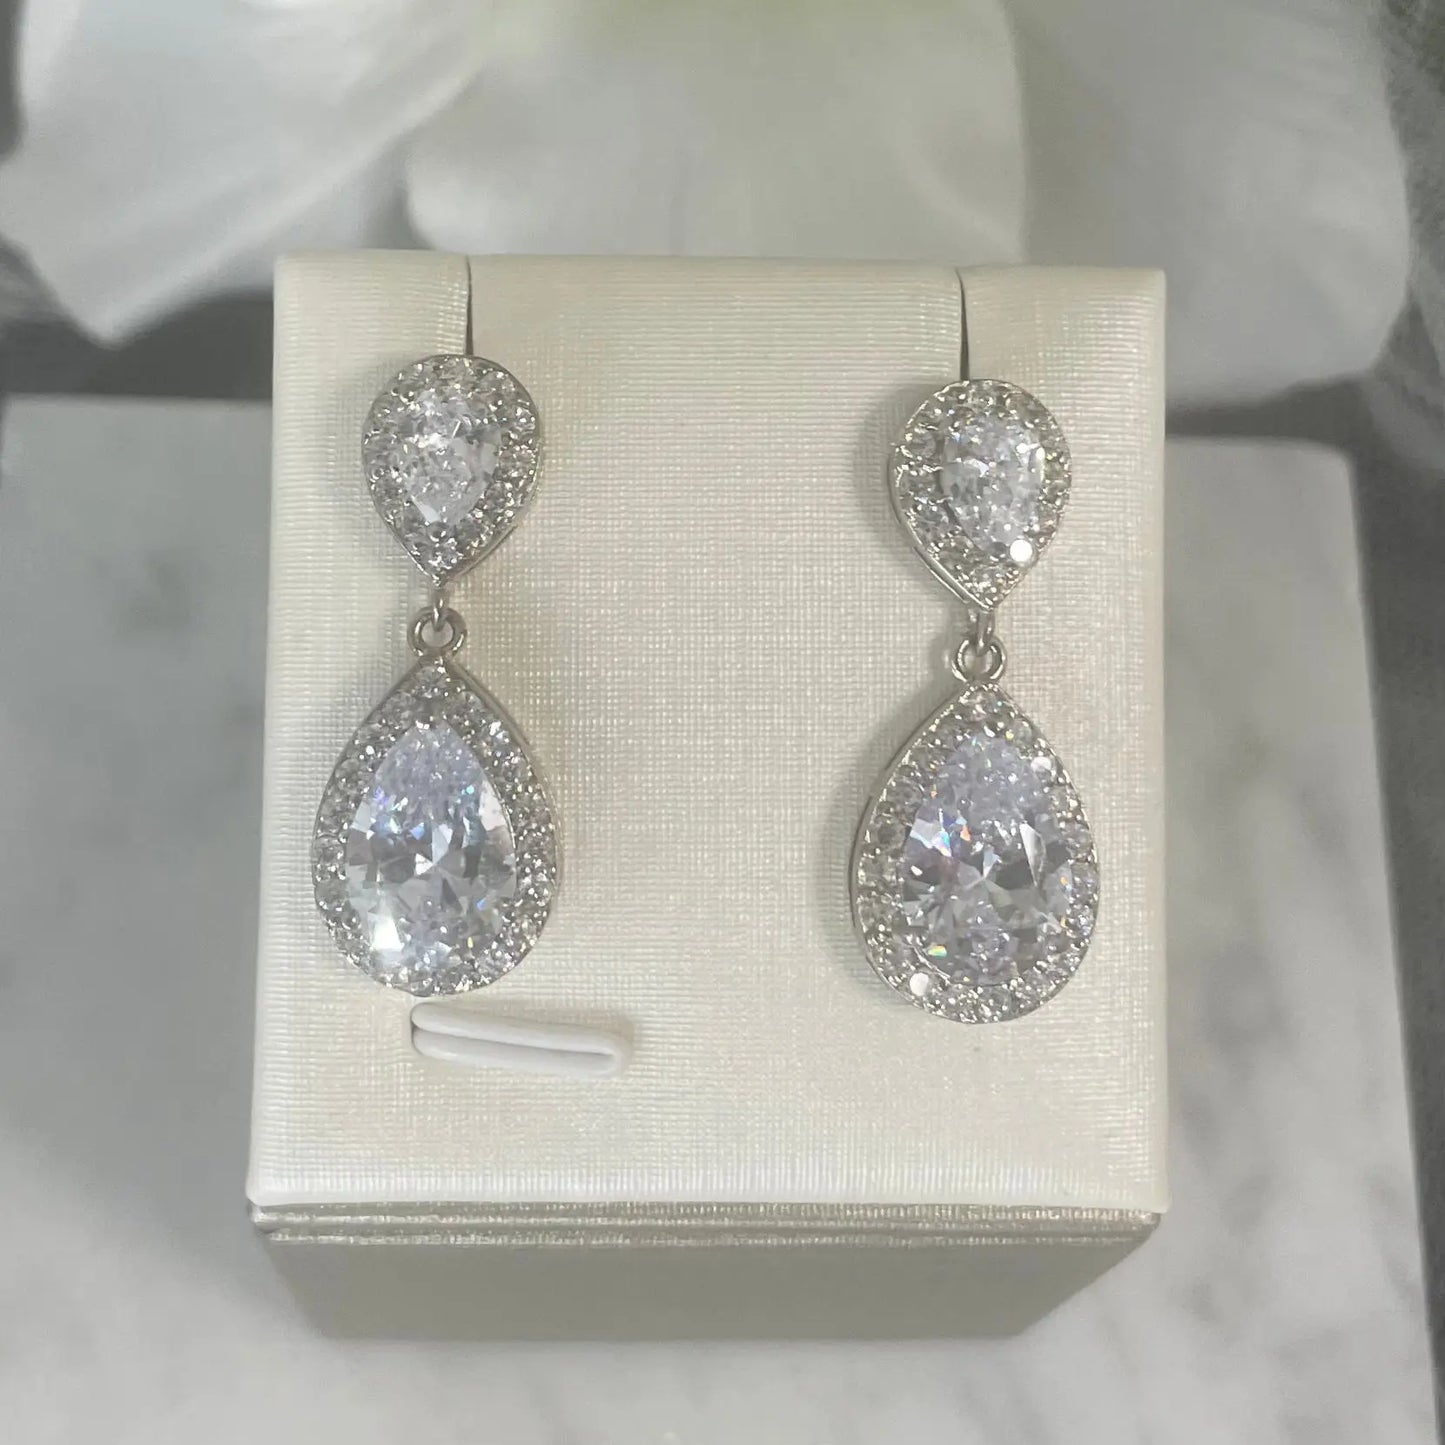 Leona Earrings (Silver): Elegant silver earrings with a large CZ stone surrounded by smaller CZs, offering a sophisticated drop design.